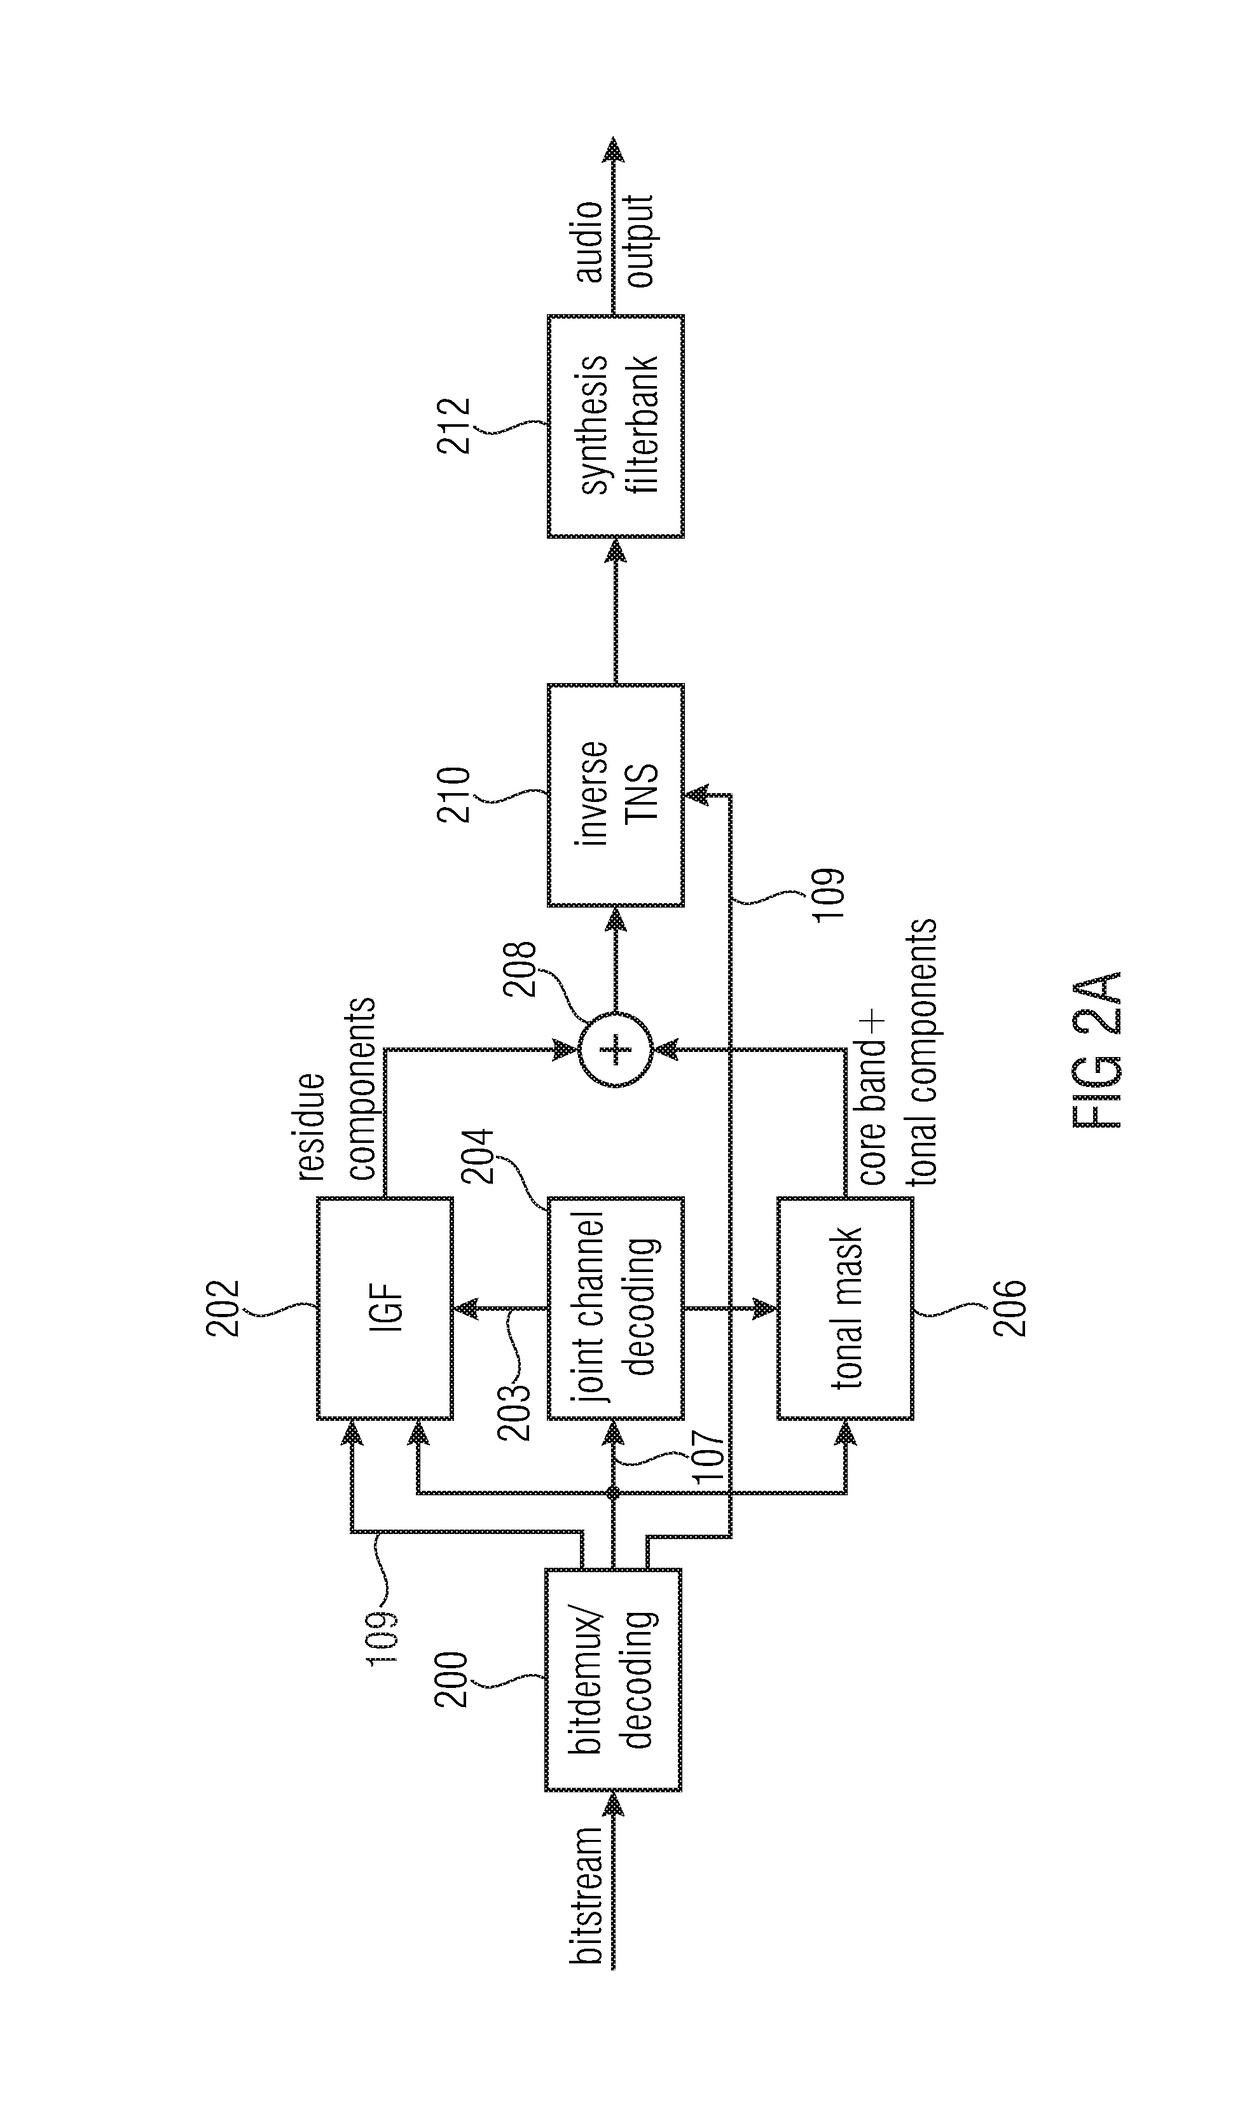 Audio encoder and decoder using a frequency domain processor with full-band gap filling and a time domain processor